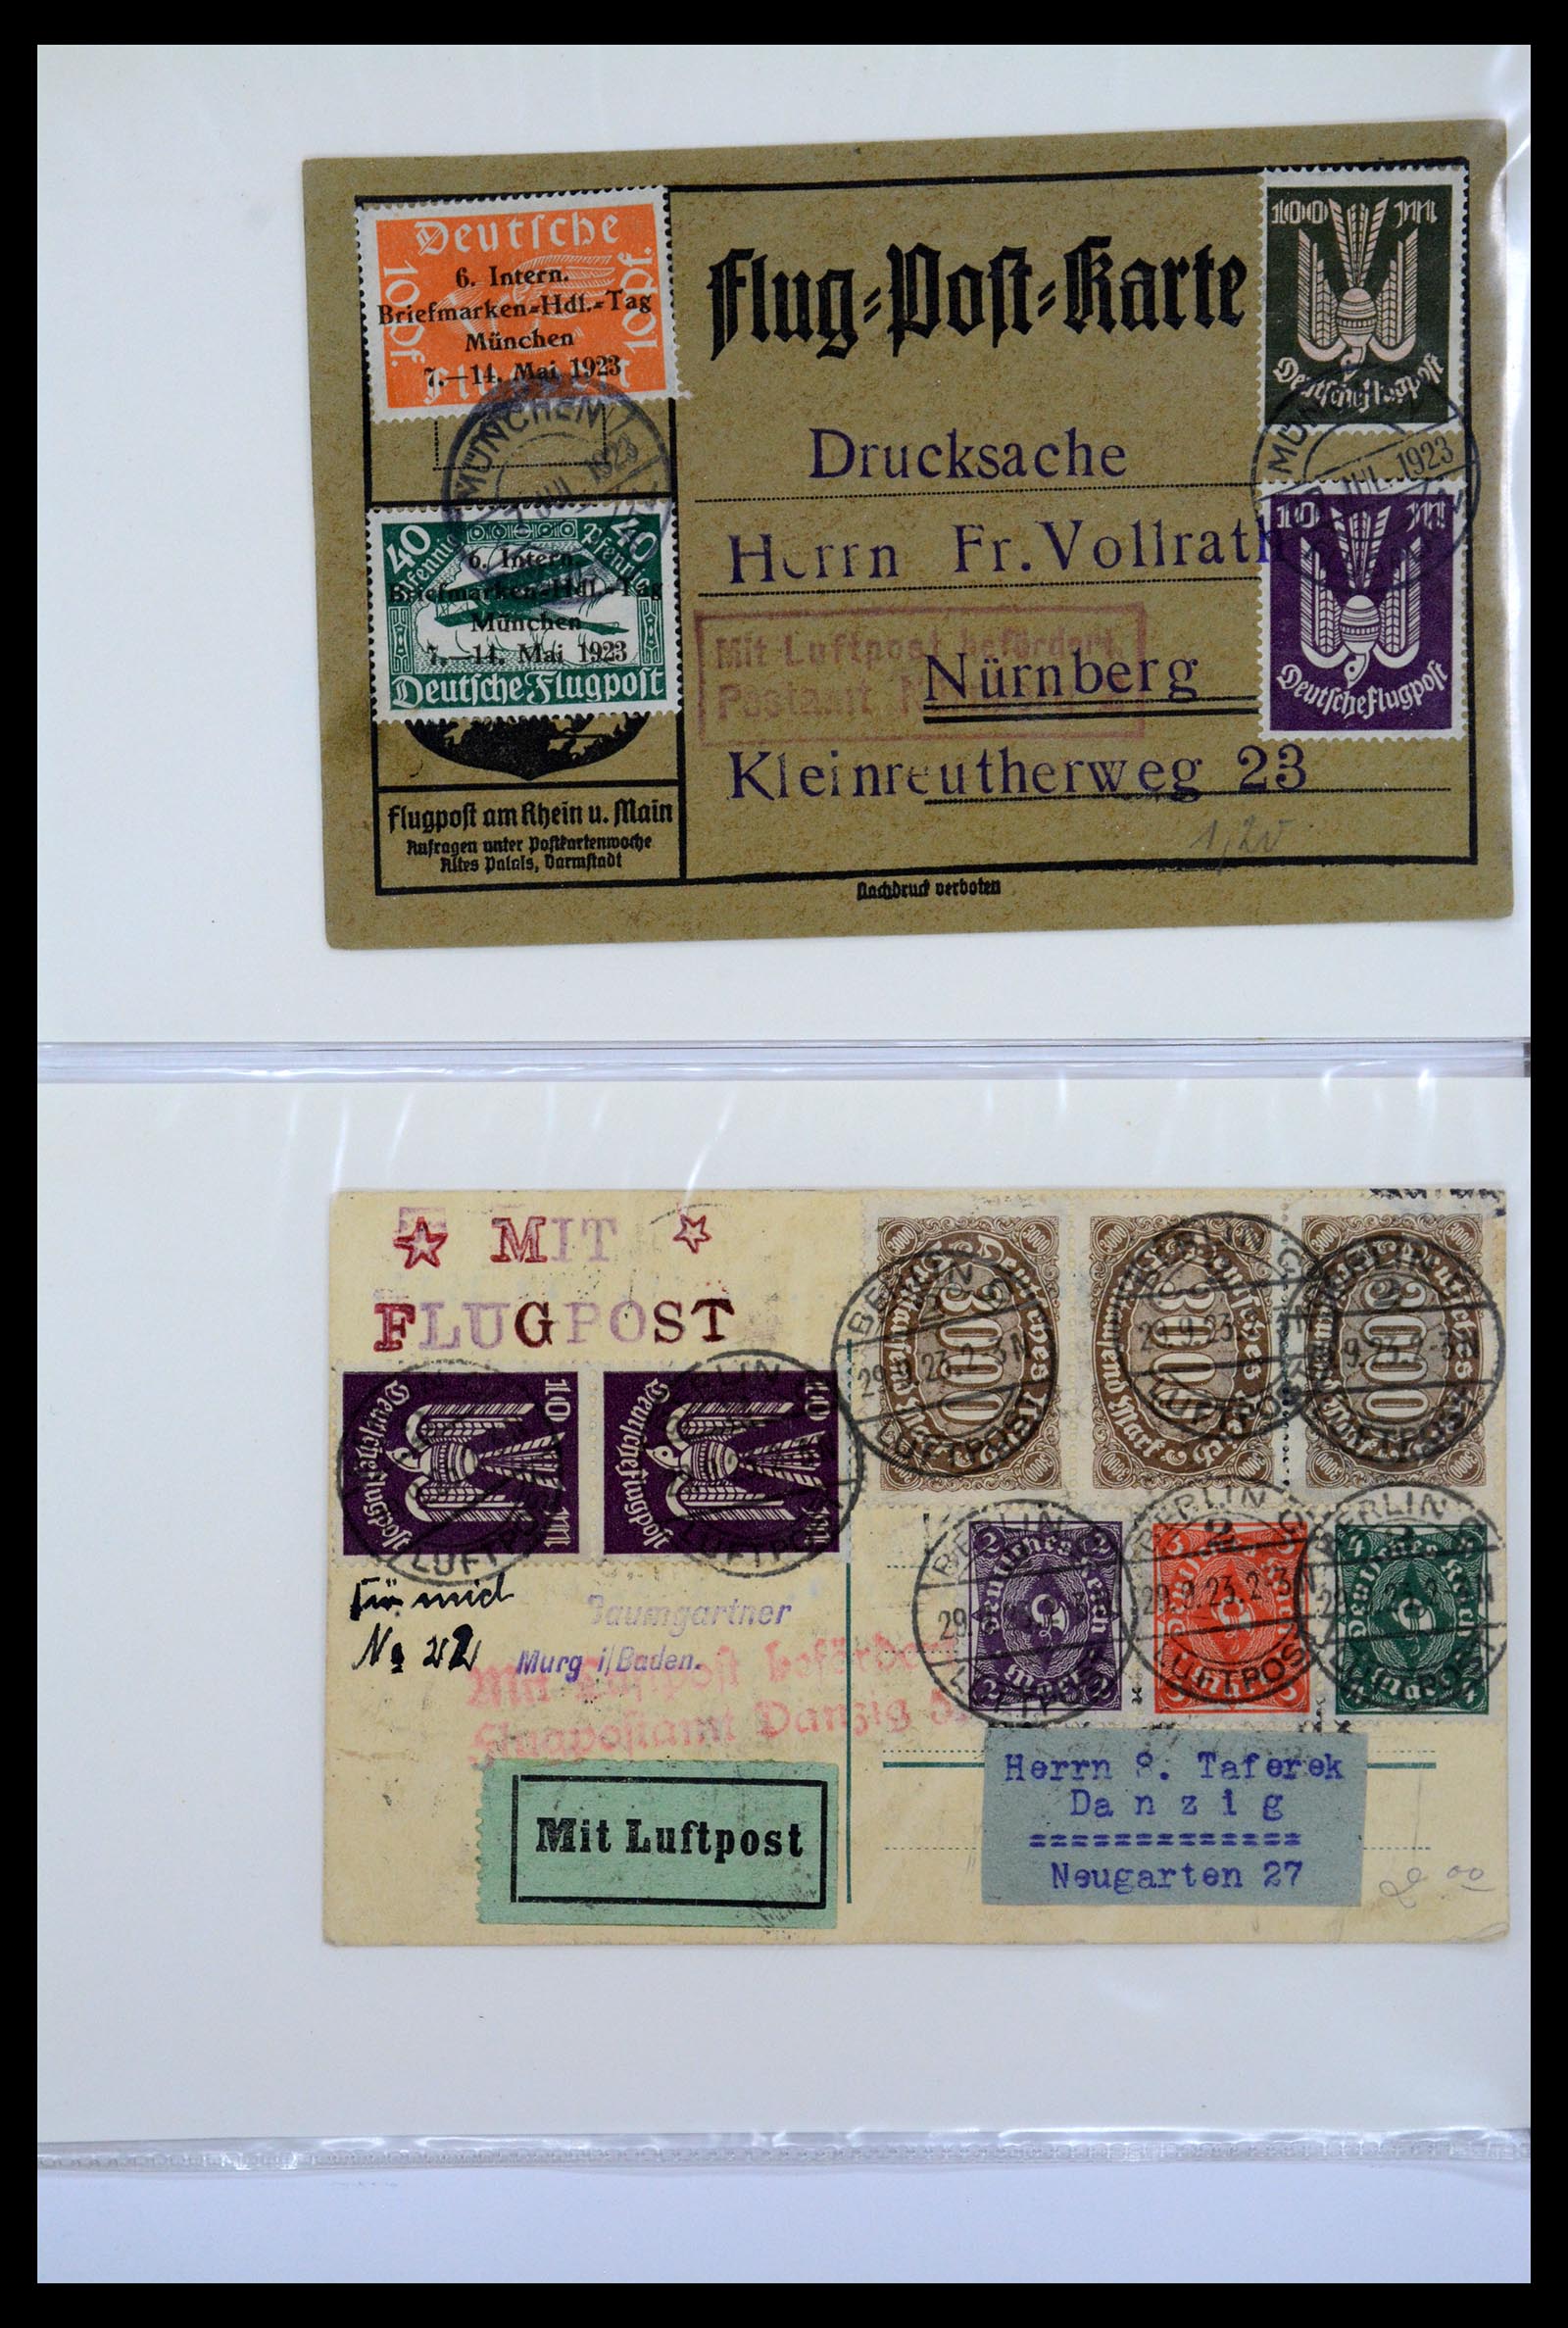 36009 020 - Stamp collection 36009 Airmail stamps and covers 1920-1940.